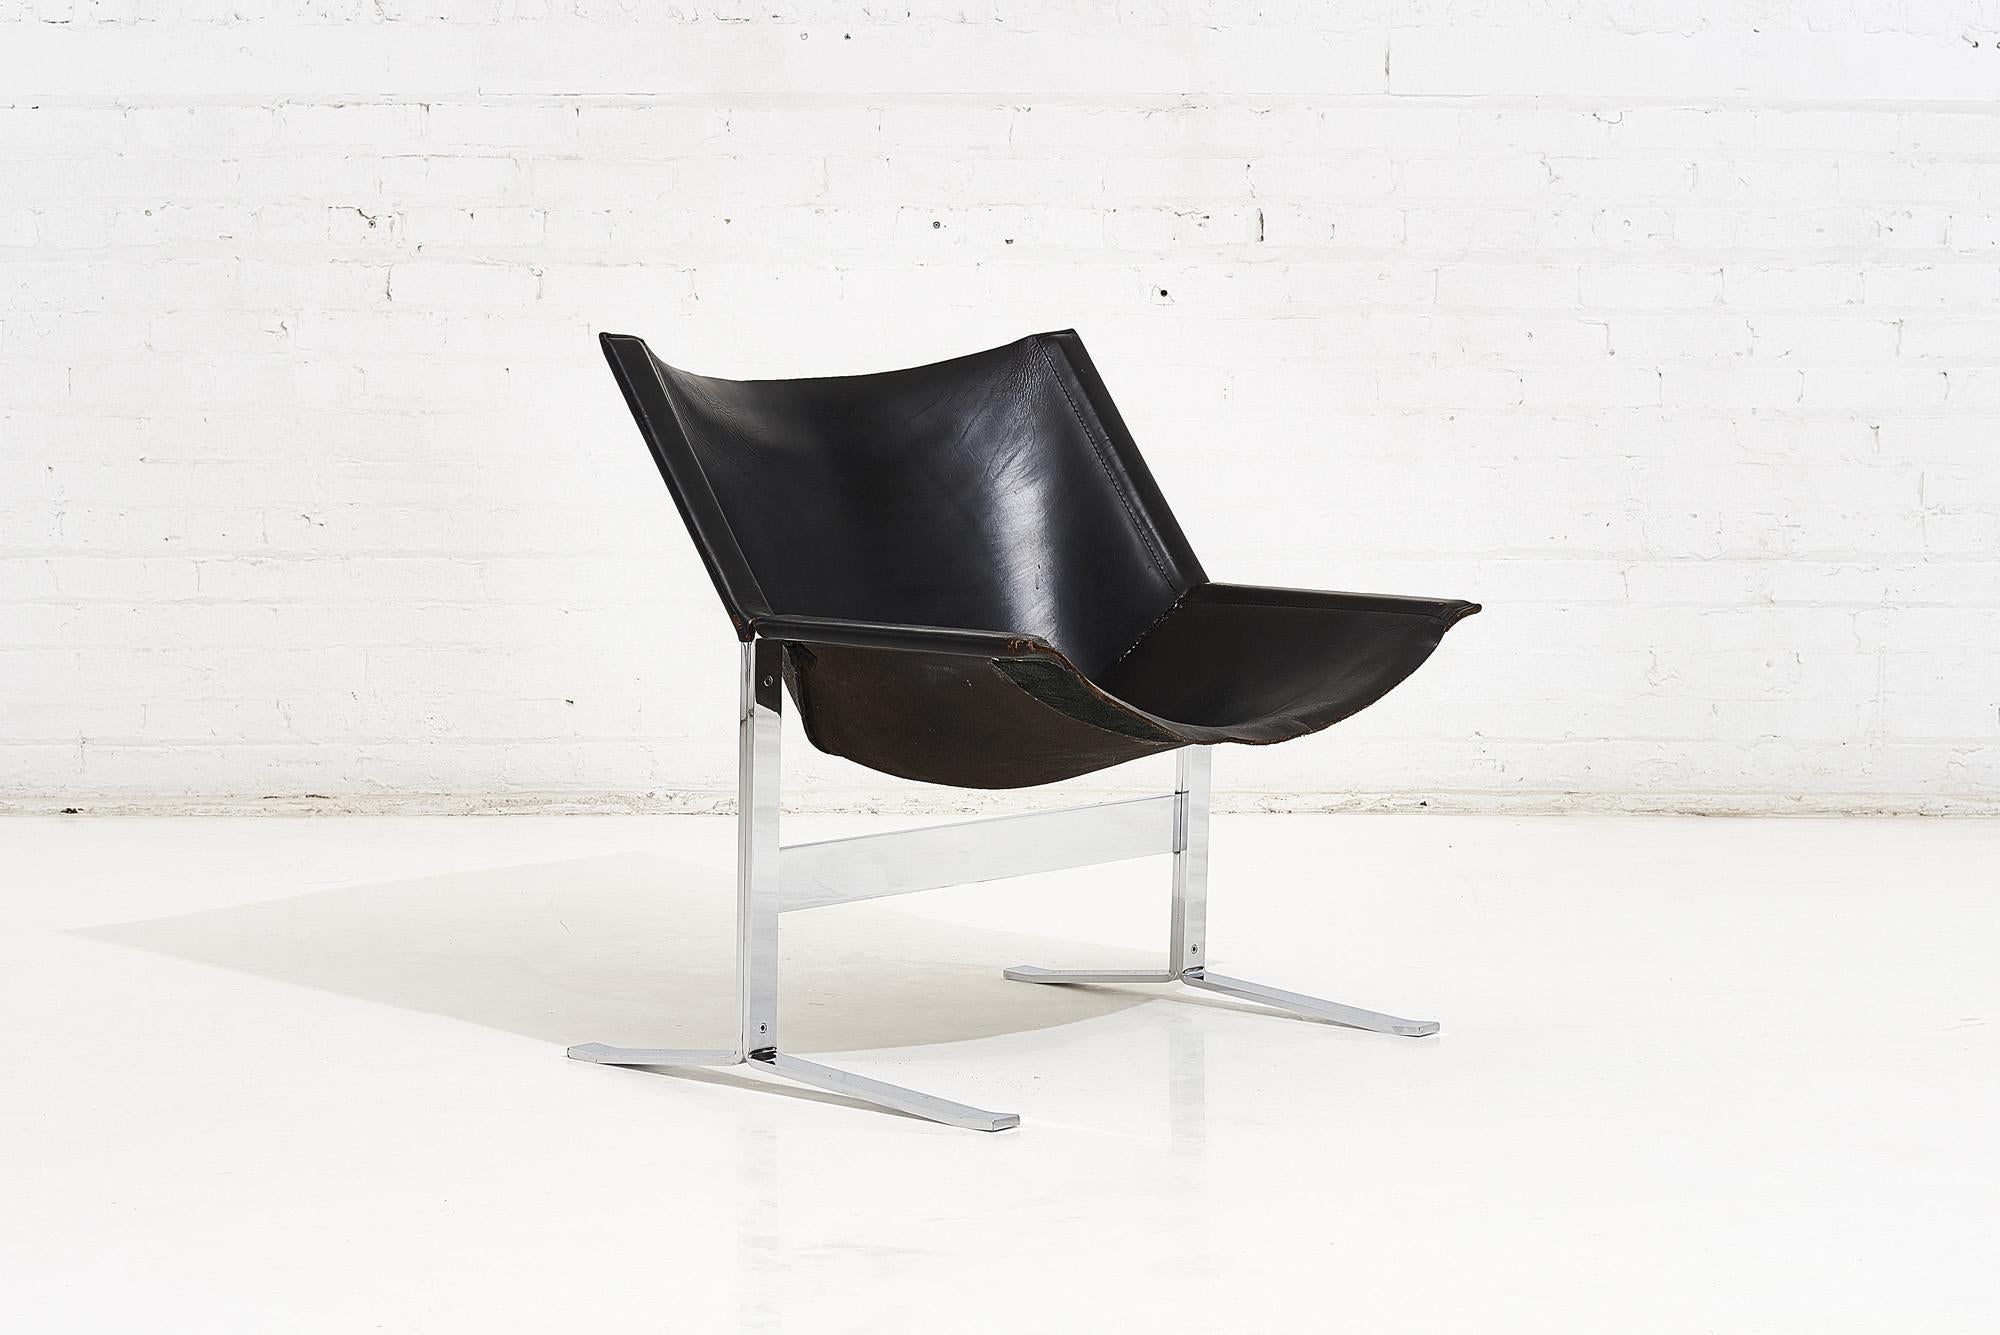 20th Century Sling Chair Model 248 by Clement Meadmore, circa 1970